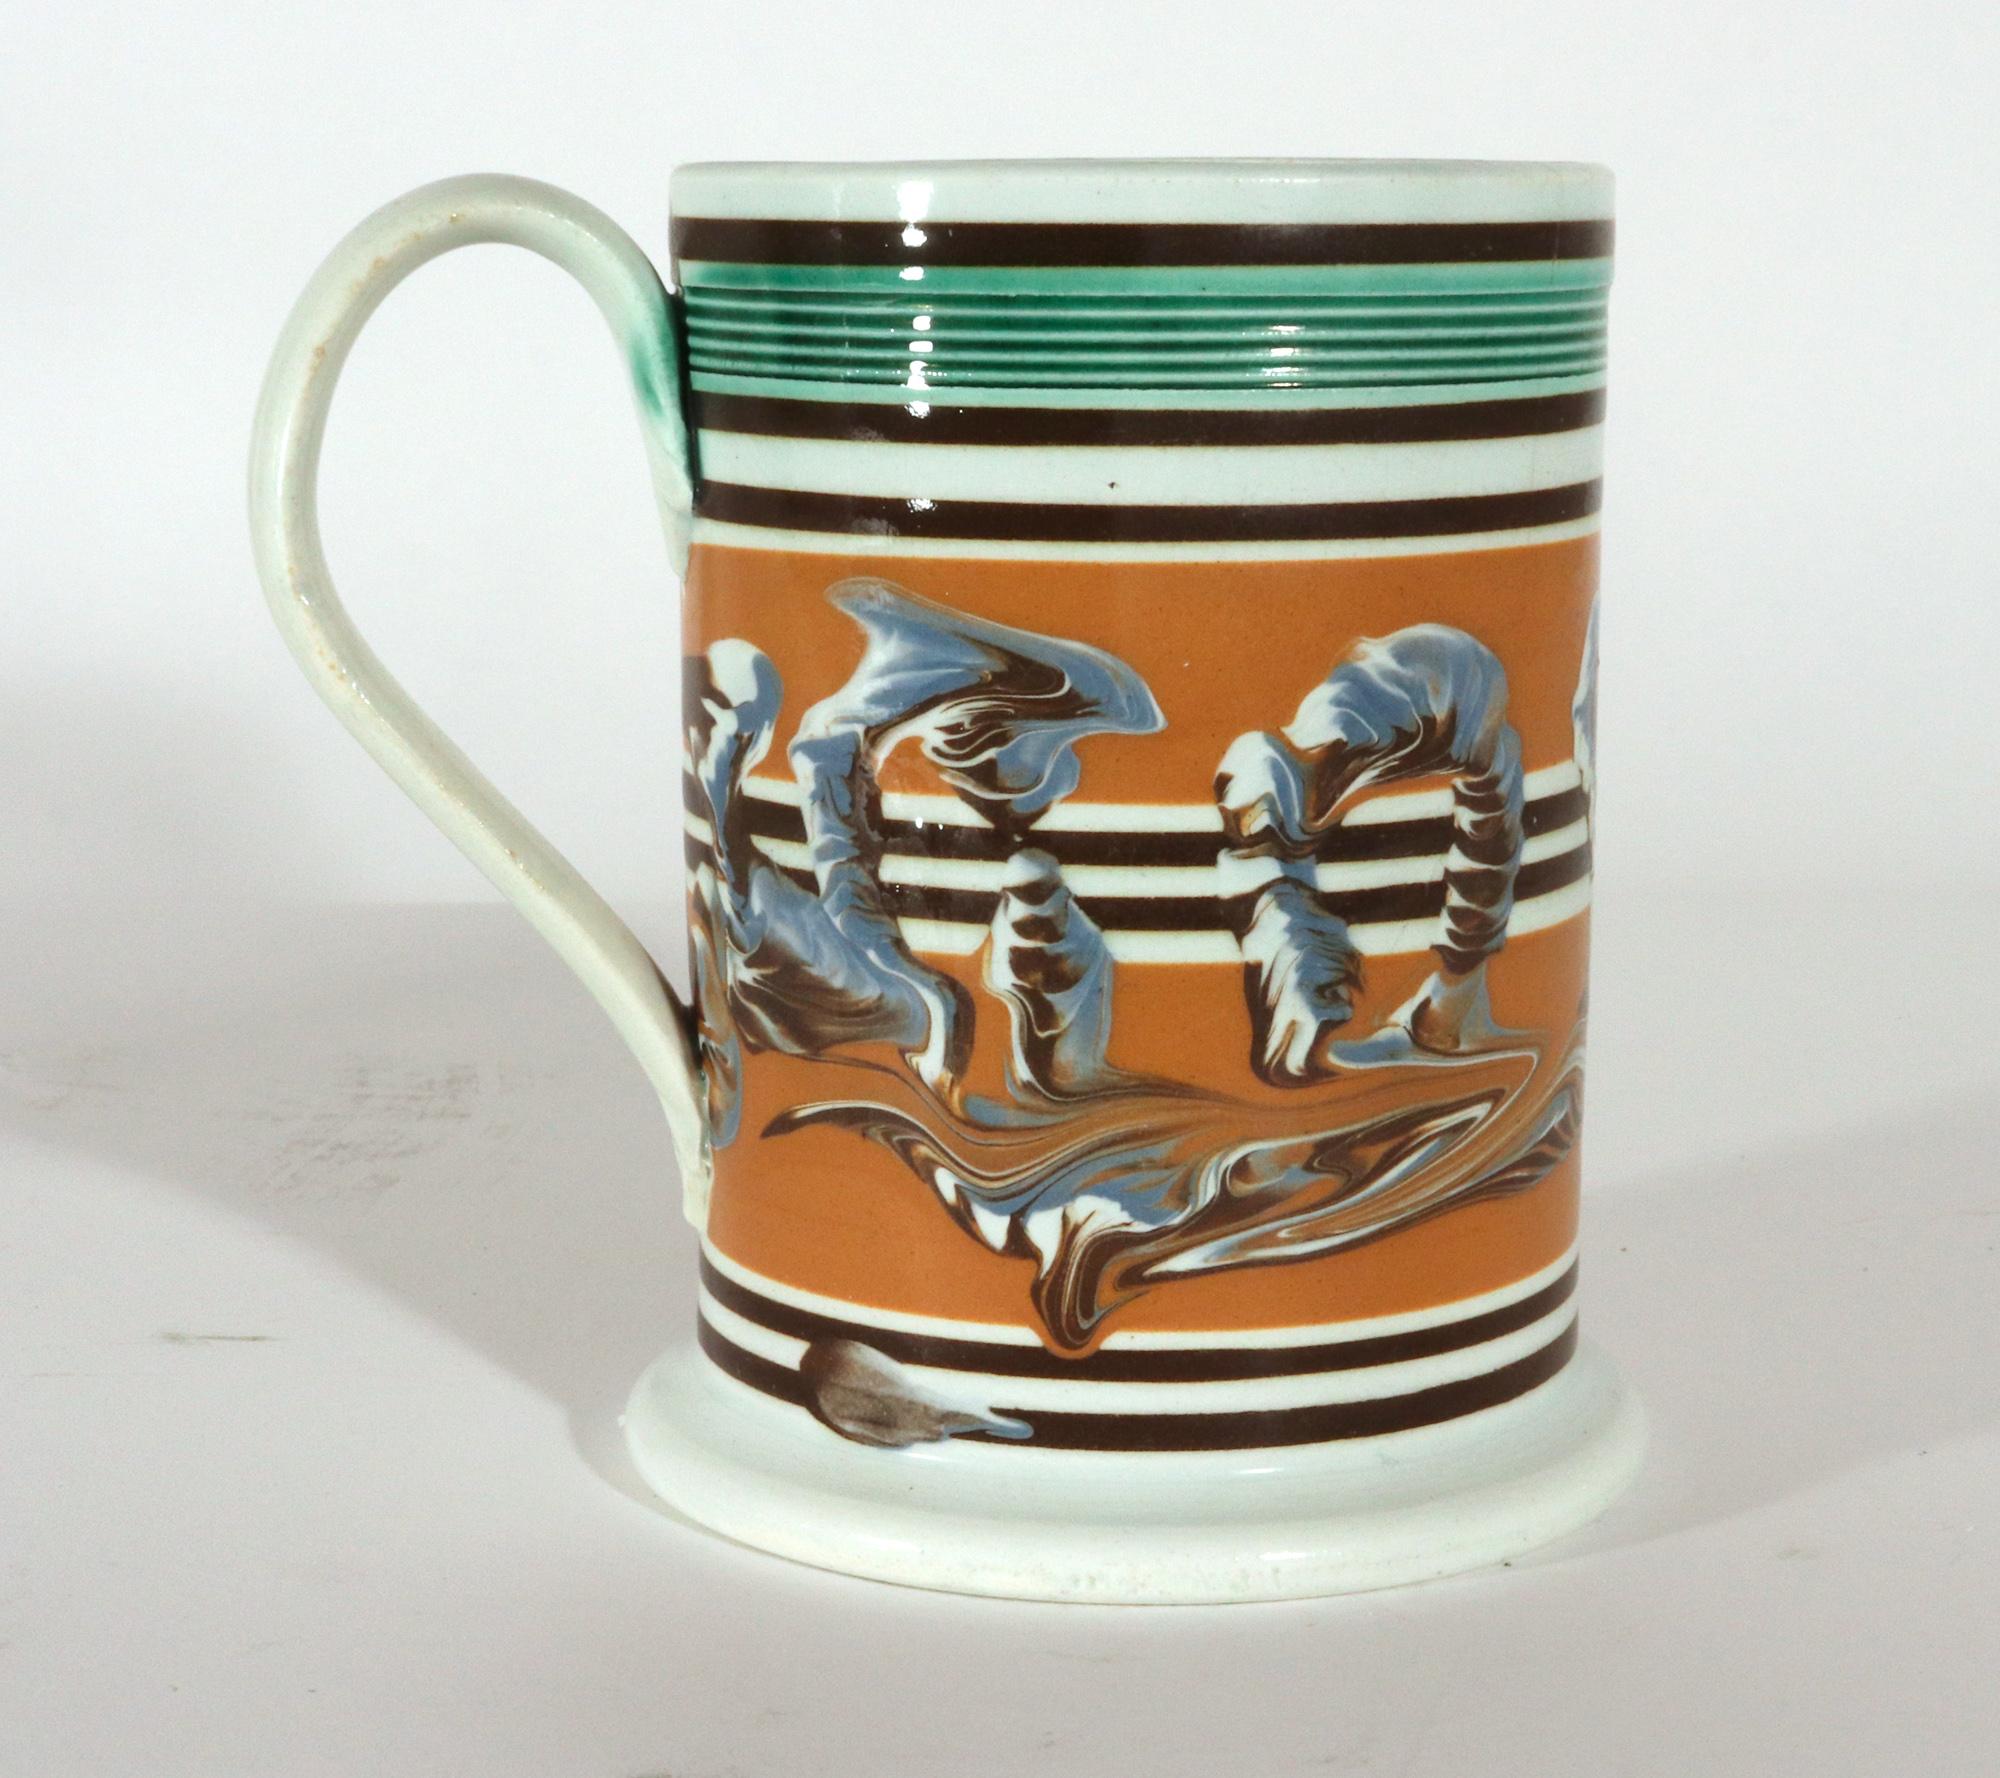 Mocha Pearlware Large Earthworm Tankard,
Circa 1800

The large pearlware Mocha tankard is decorated with a looping tri-color earthworm design around the center on an ochre-colored ground.  The tankard has a wide flaring foot and three groupings of